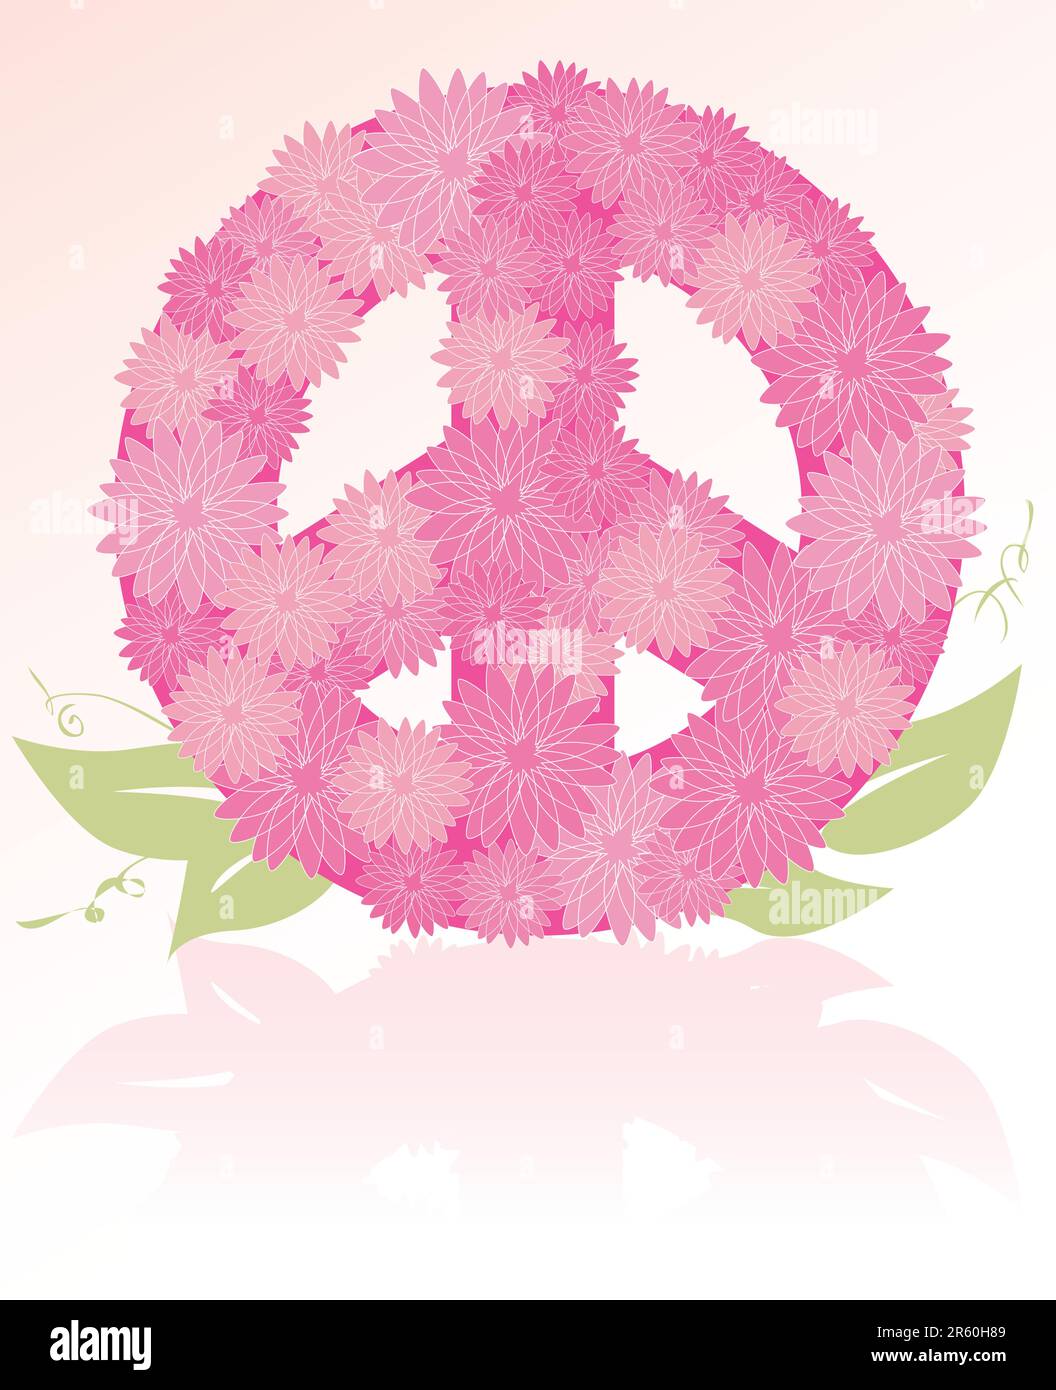 Peace Sign flower bouquet. Easy-edit layered file. Look for other icons in this series Stock Vector